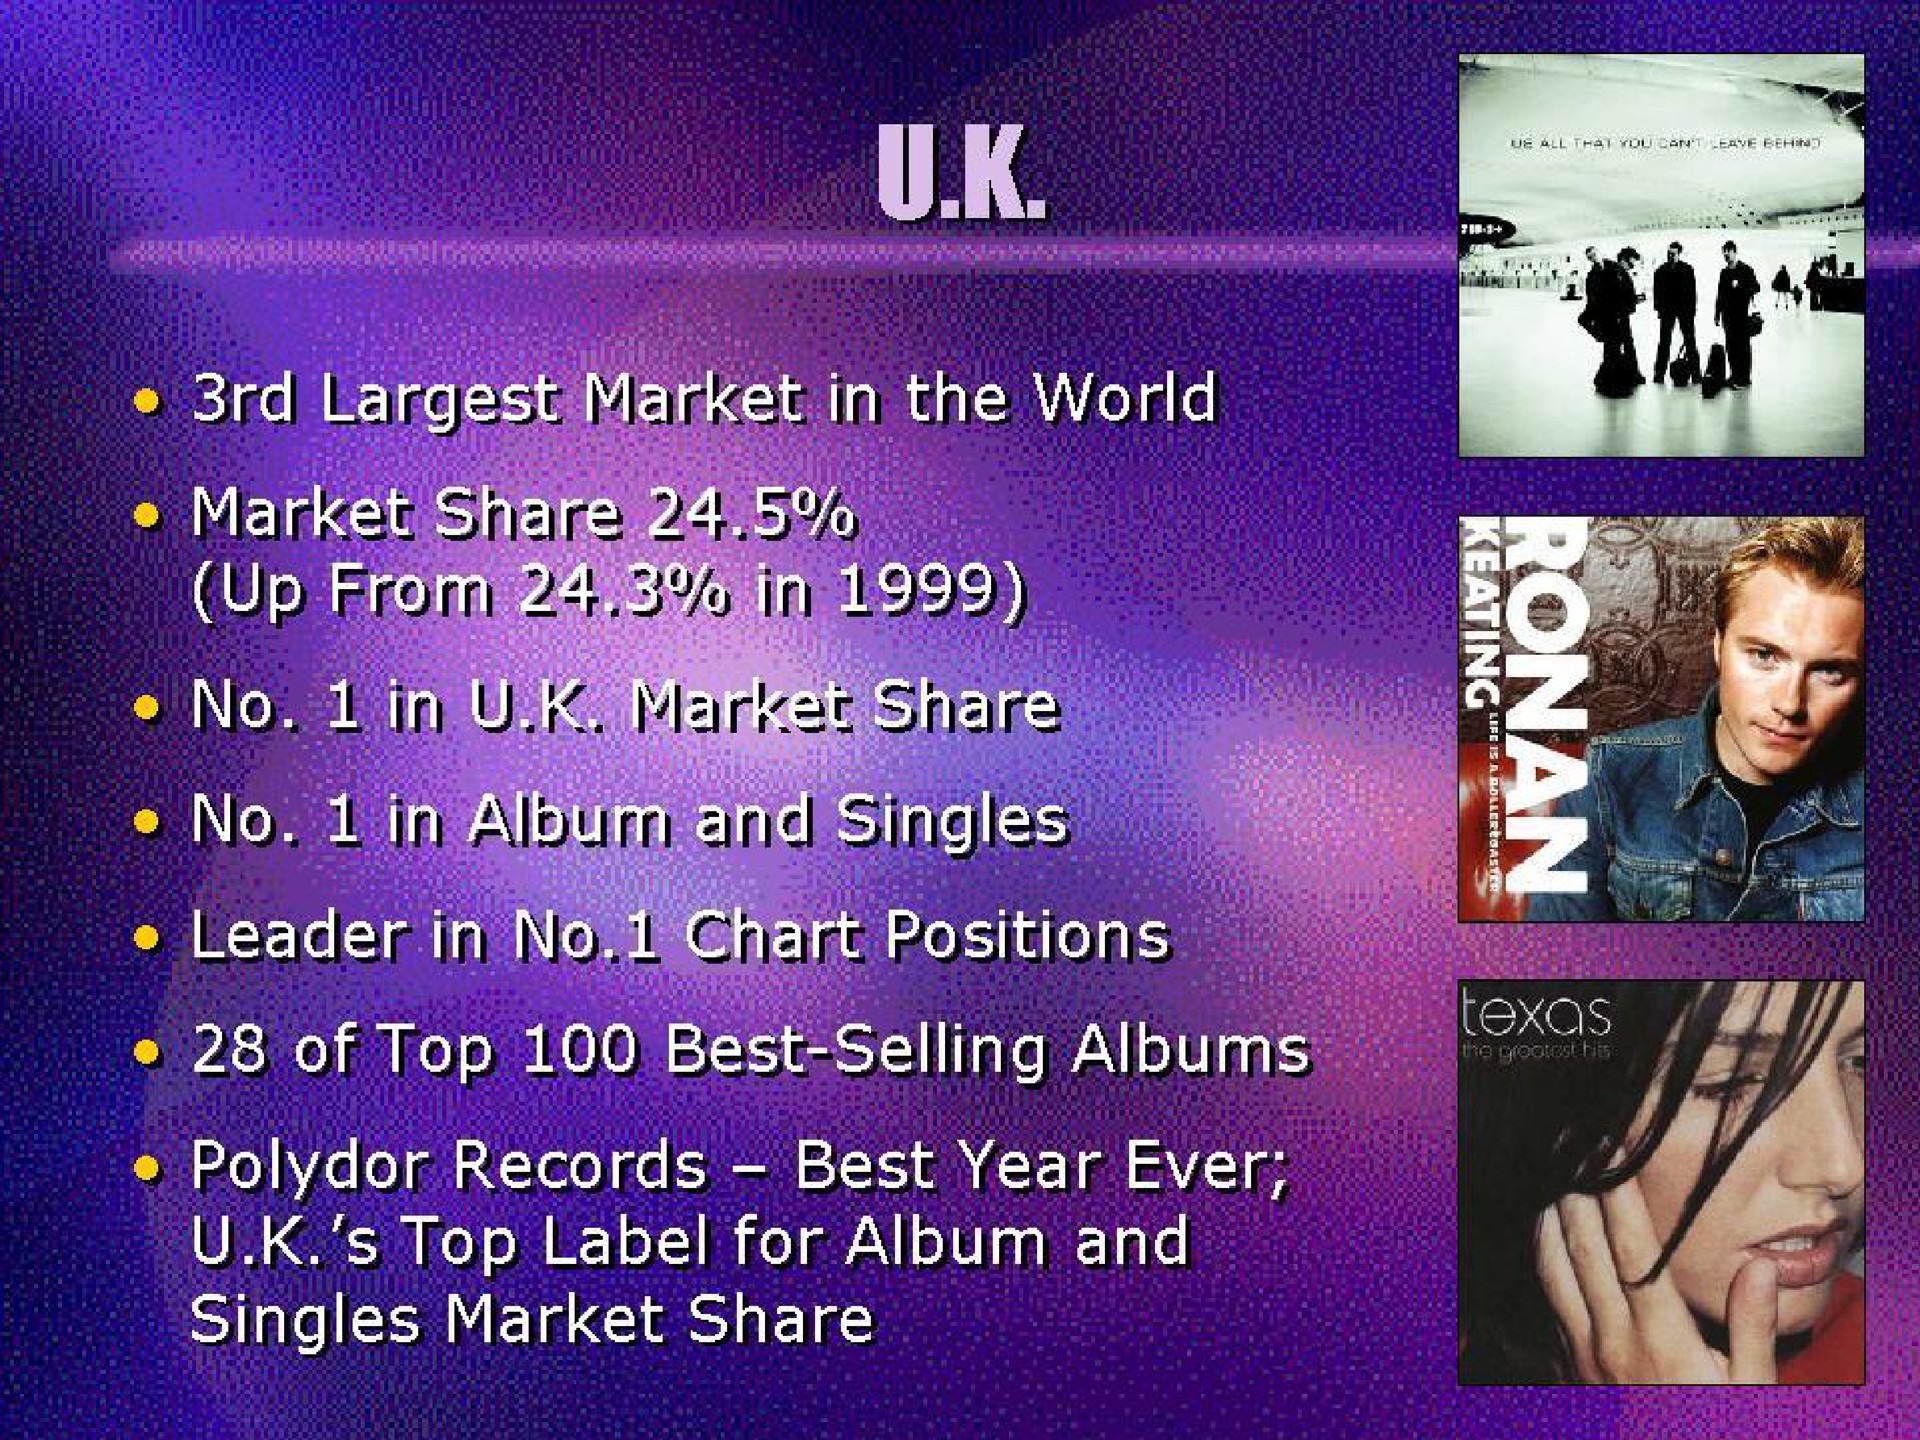 of top a records best year ever top label for album and singles market share | Universal Music Group